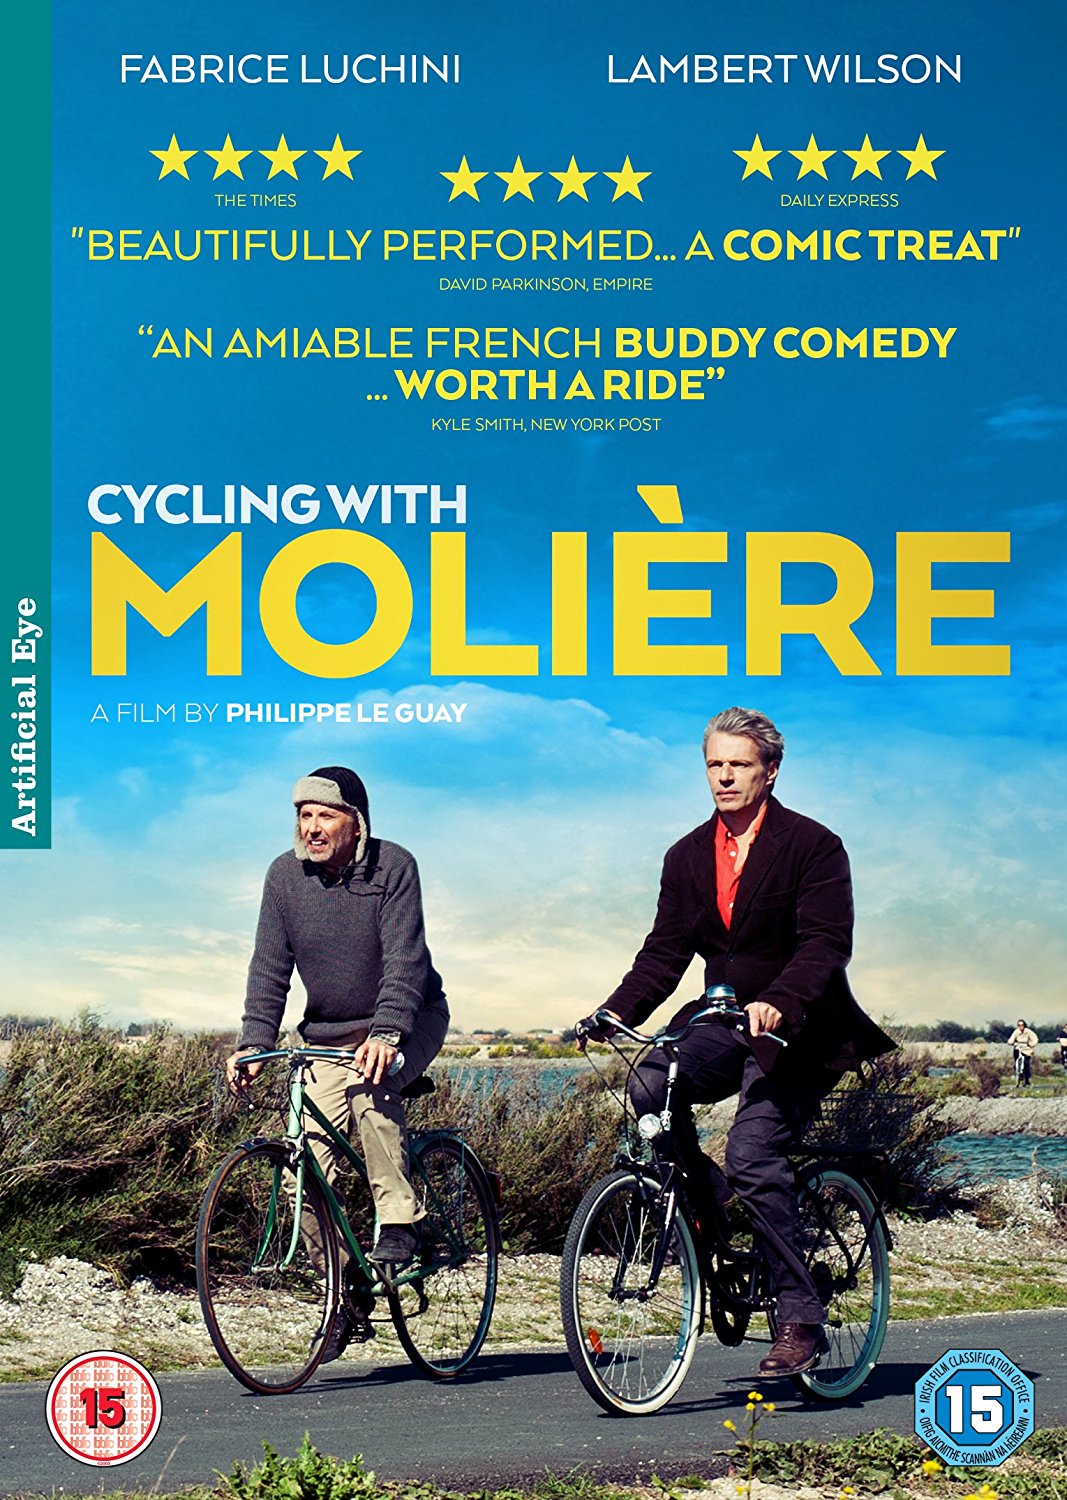 Alceste a bicyclette / Cycling with Moliere | Philippe Le Guay